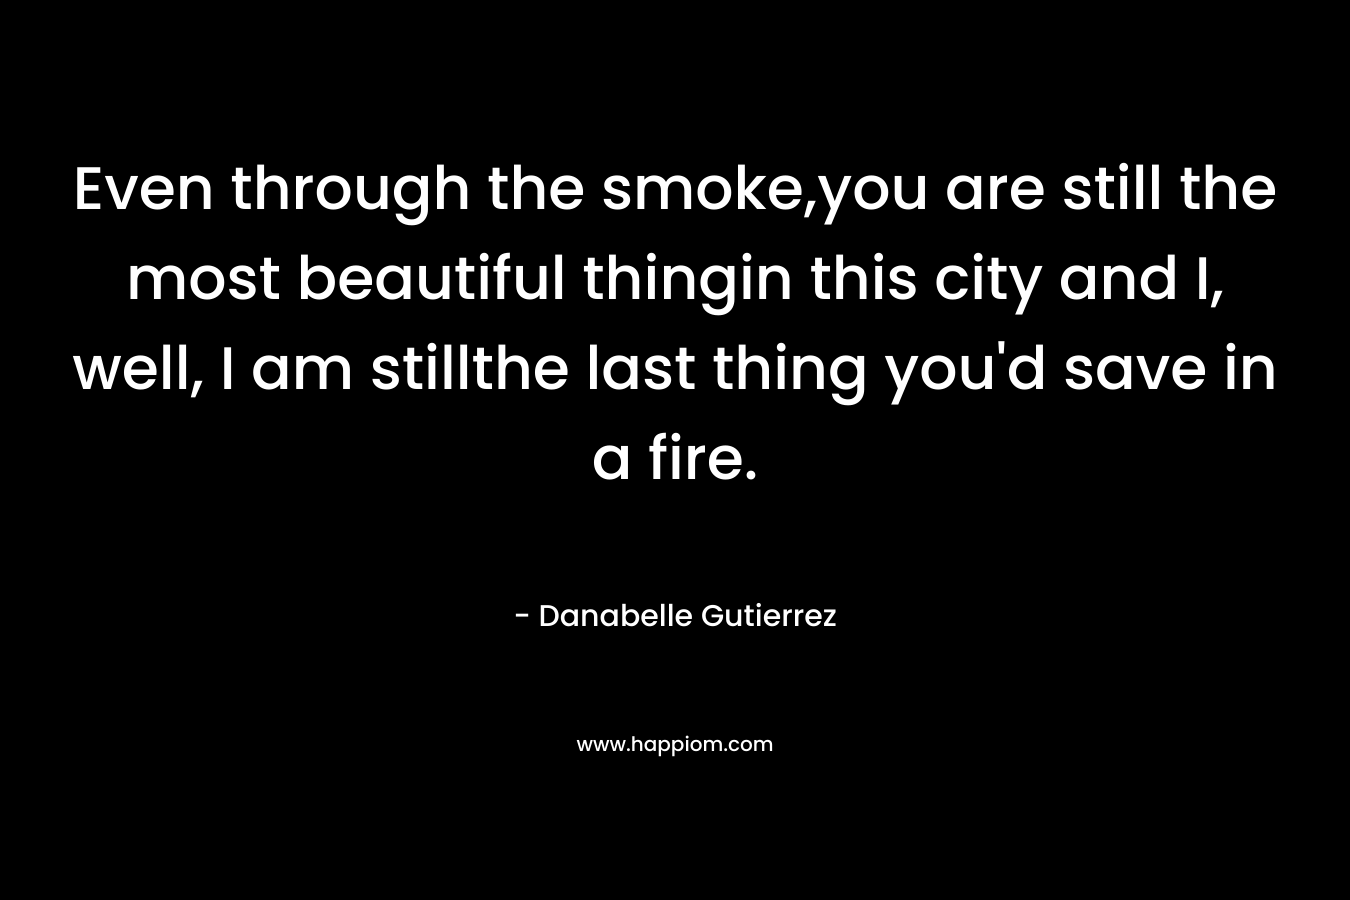 Even through the smoke,you are still the most beautiful thingin this city and I, well, I am stillthe last thing you'd save in a fire.